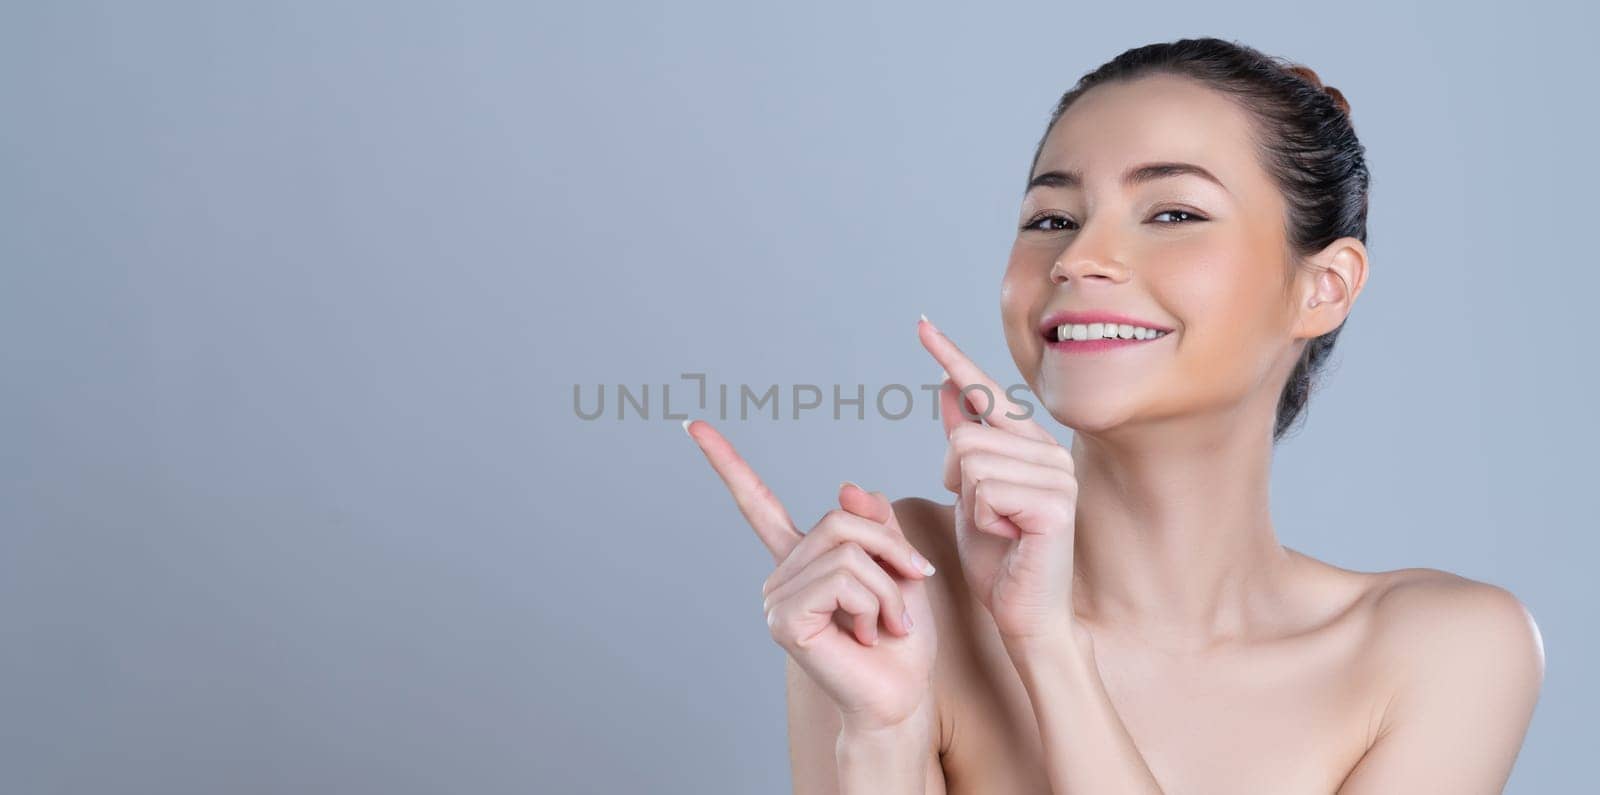 Glamorous woman pointing finger advertising product in isolated background. by biancoblue